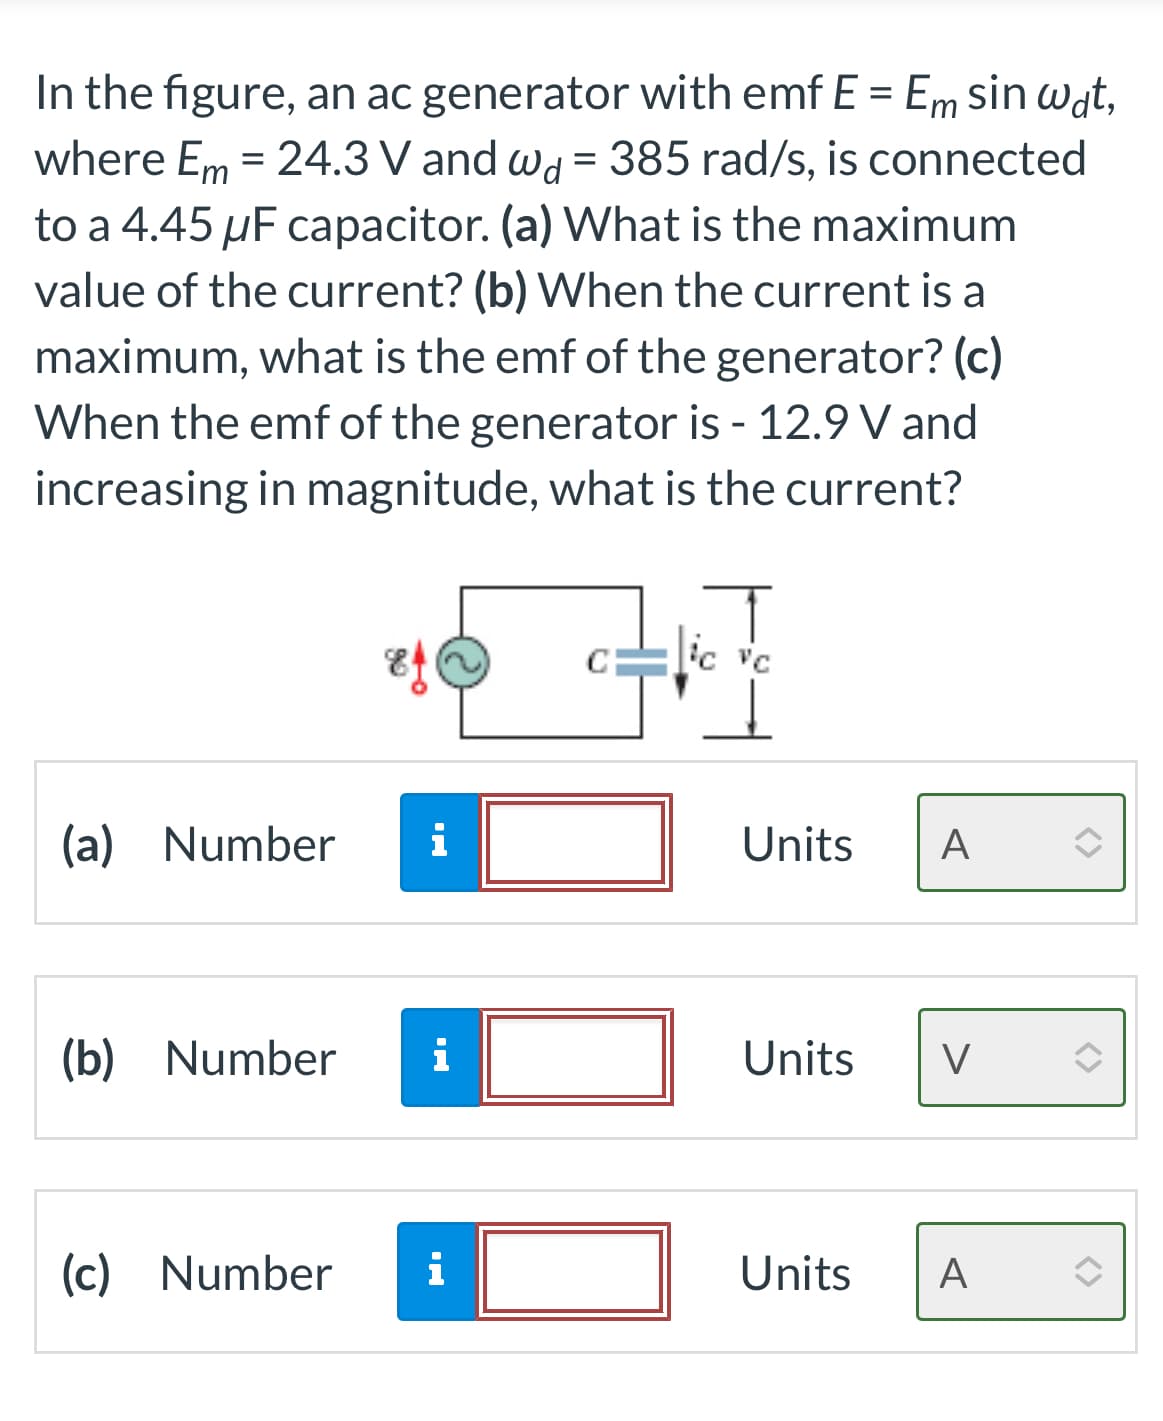 In the figure, an ac generator with emf E = Em sin wat,
where Em = 24.3 V and wd = 385 rad/s, is connected
to a 4.45 µF capacitor. (a) What is the maximum
value of the current? (b) When the current is a
maximum, what is the emf of the generator? (c)
When the emf of the generator is - 12.9 V and
increasing in magnitude, what is the current?
(a) Number i
(b) Number i
(c) Number
i
C
T
ic vc
Units A
Units V
Units A